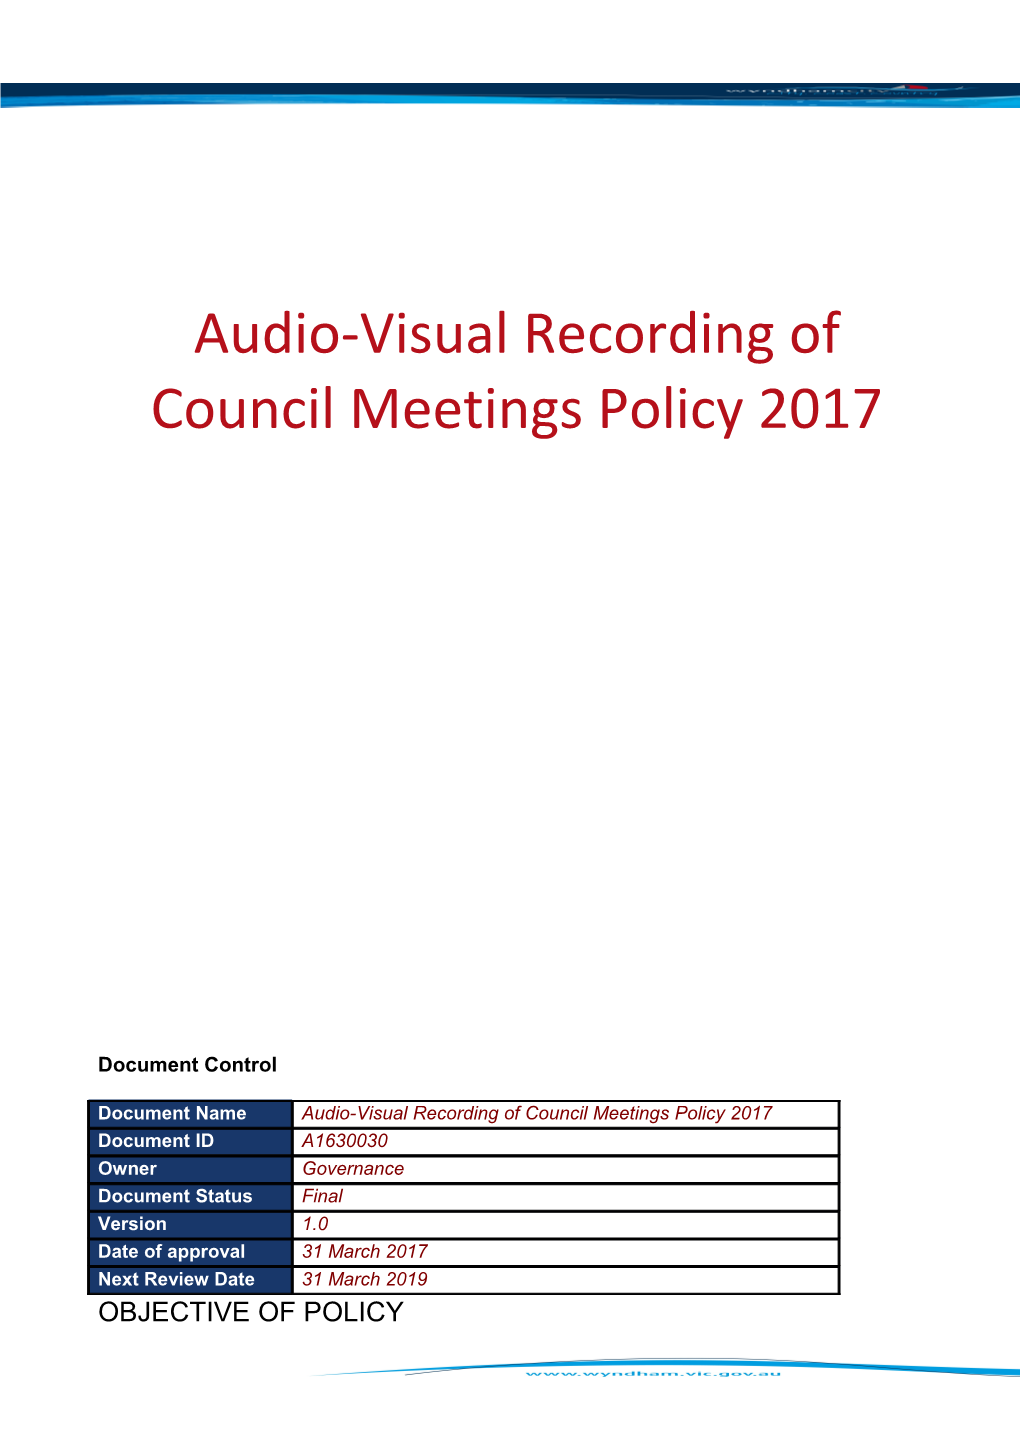 Audio-Visual Recording of Council Meetings Policy2017